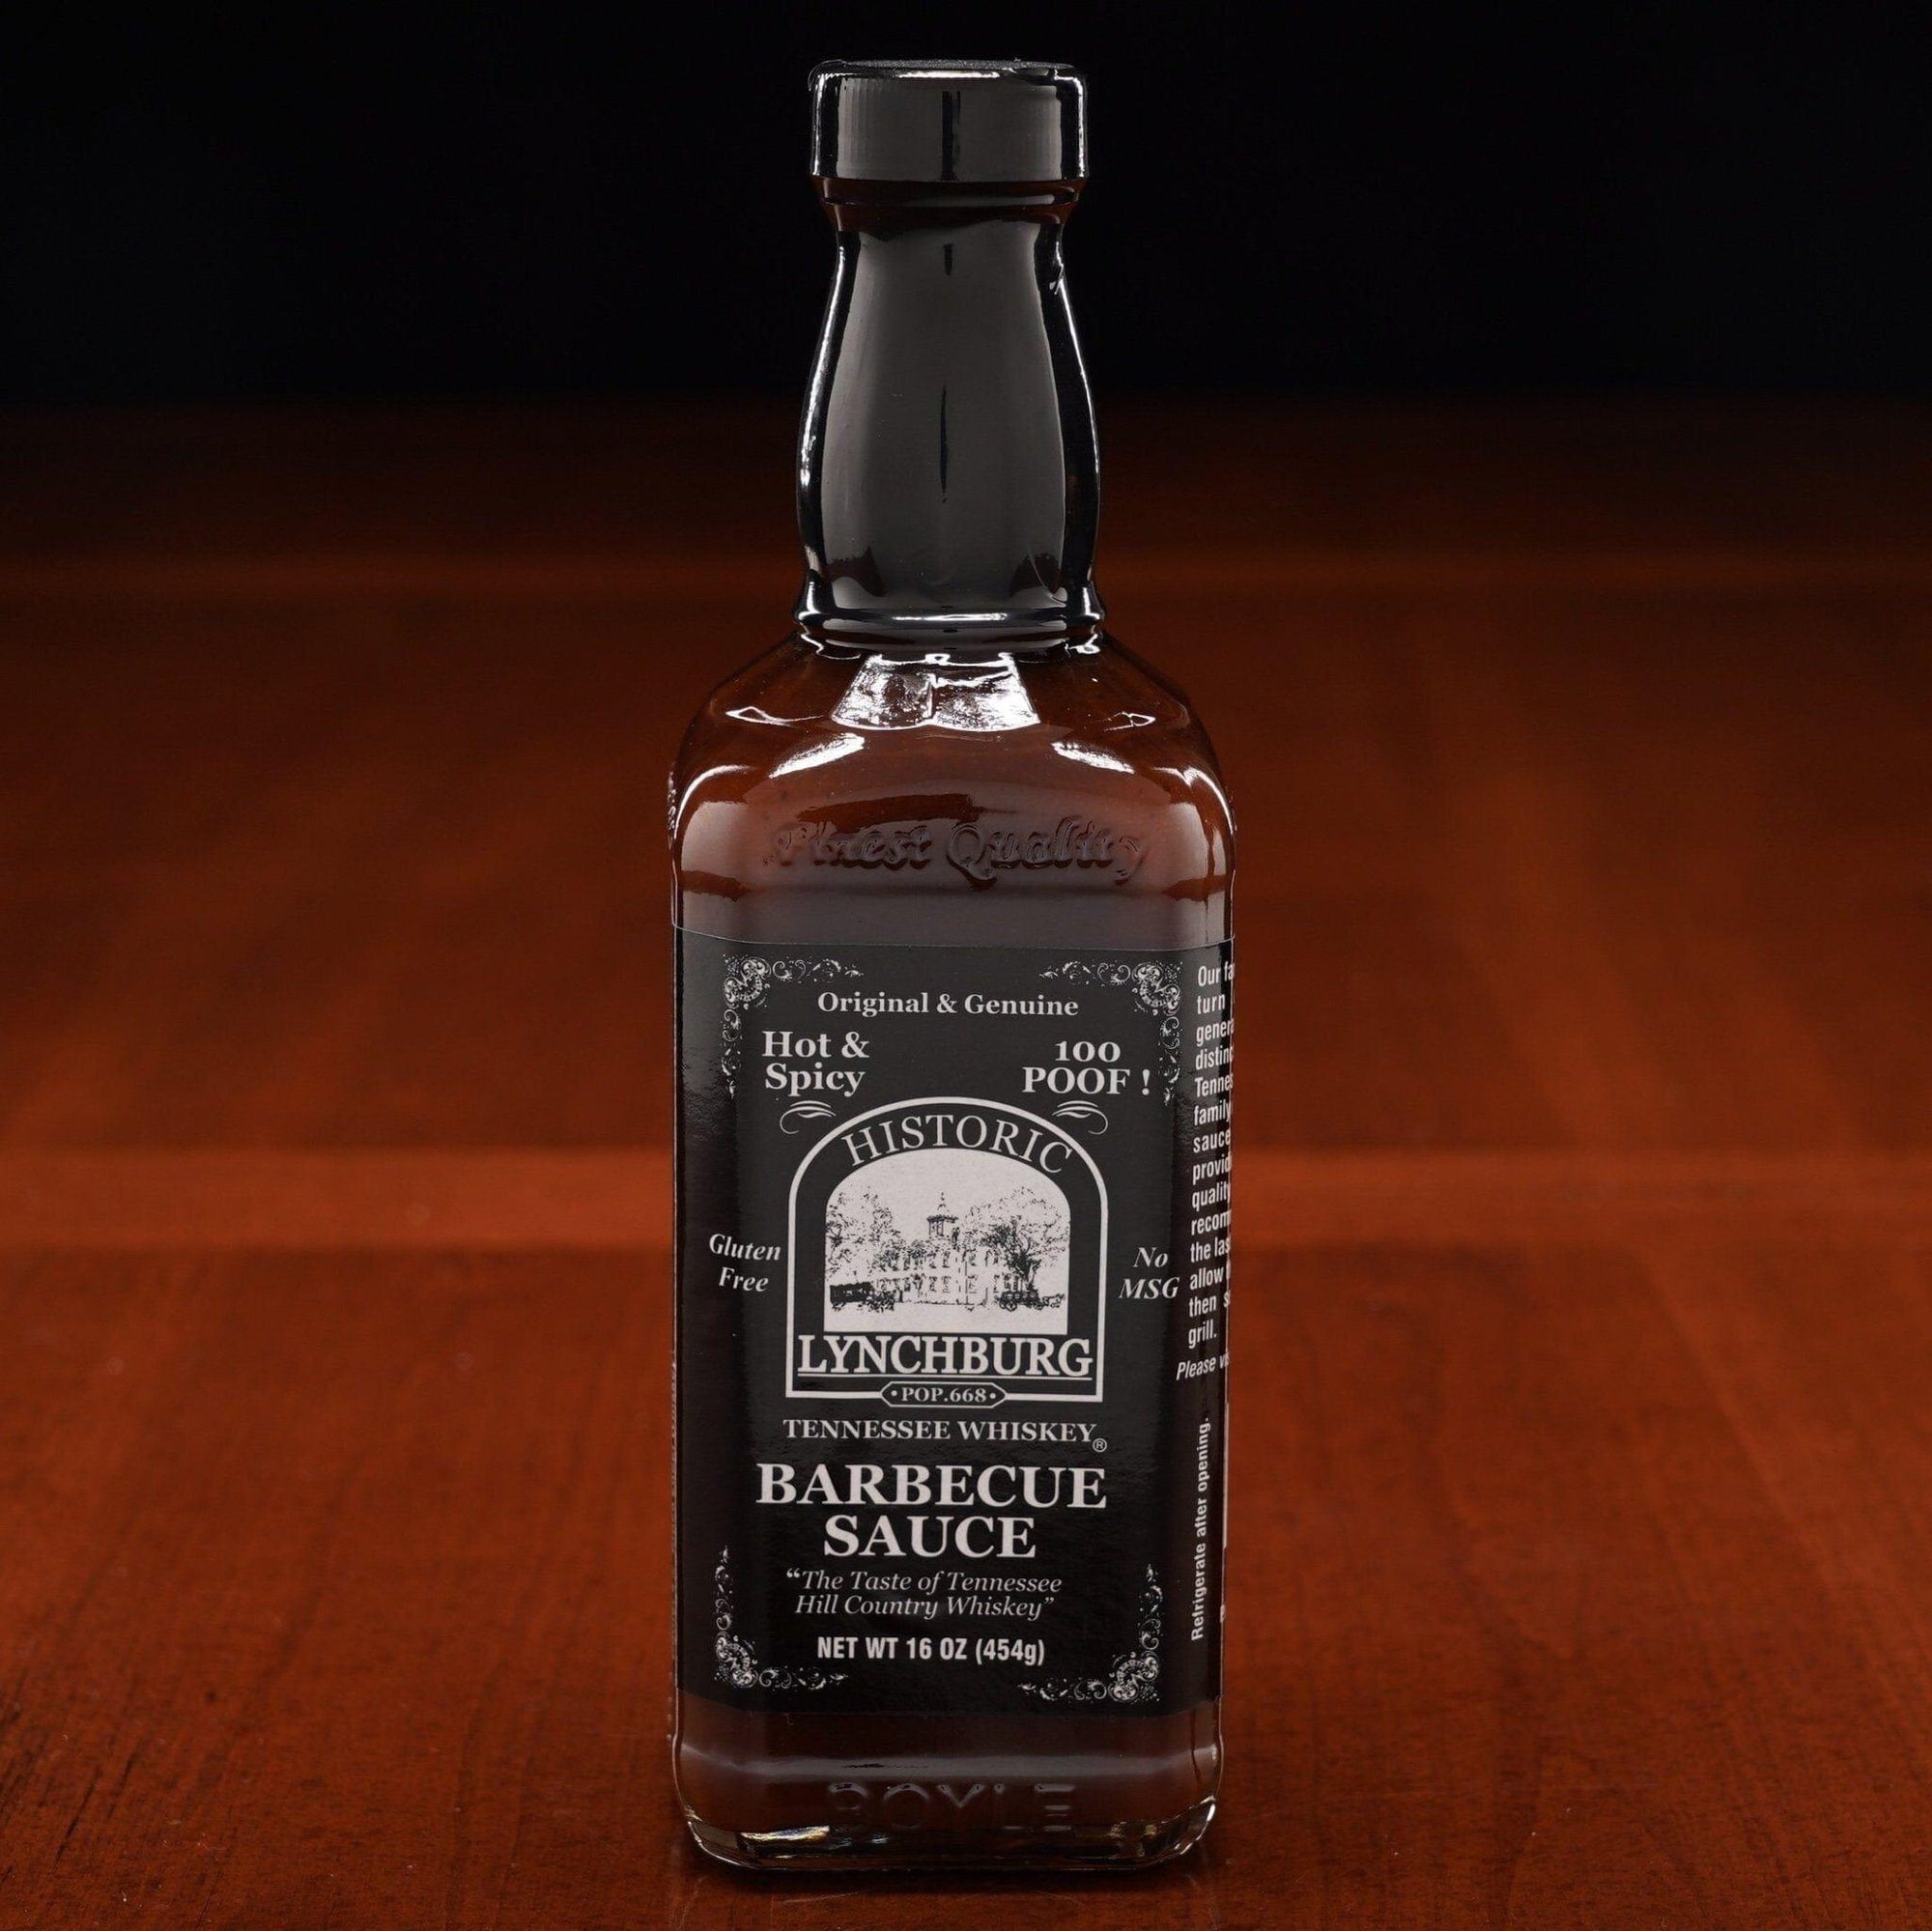 Historic Lynchburg Hot Barbecue Sauce made with Jack Daniels - The Whiskey Cave